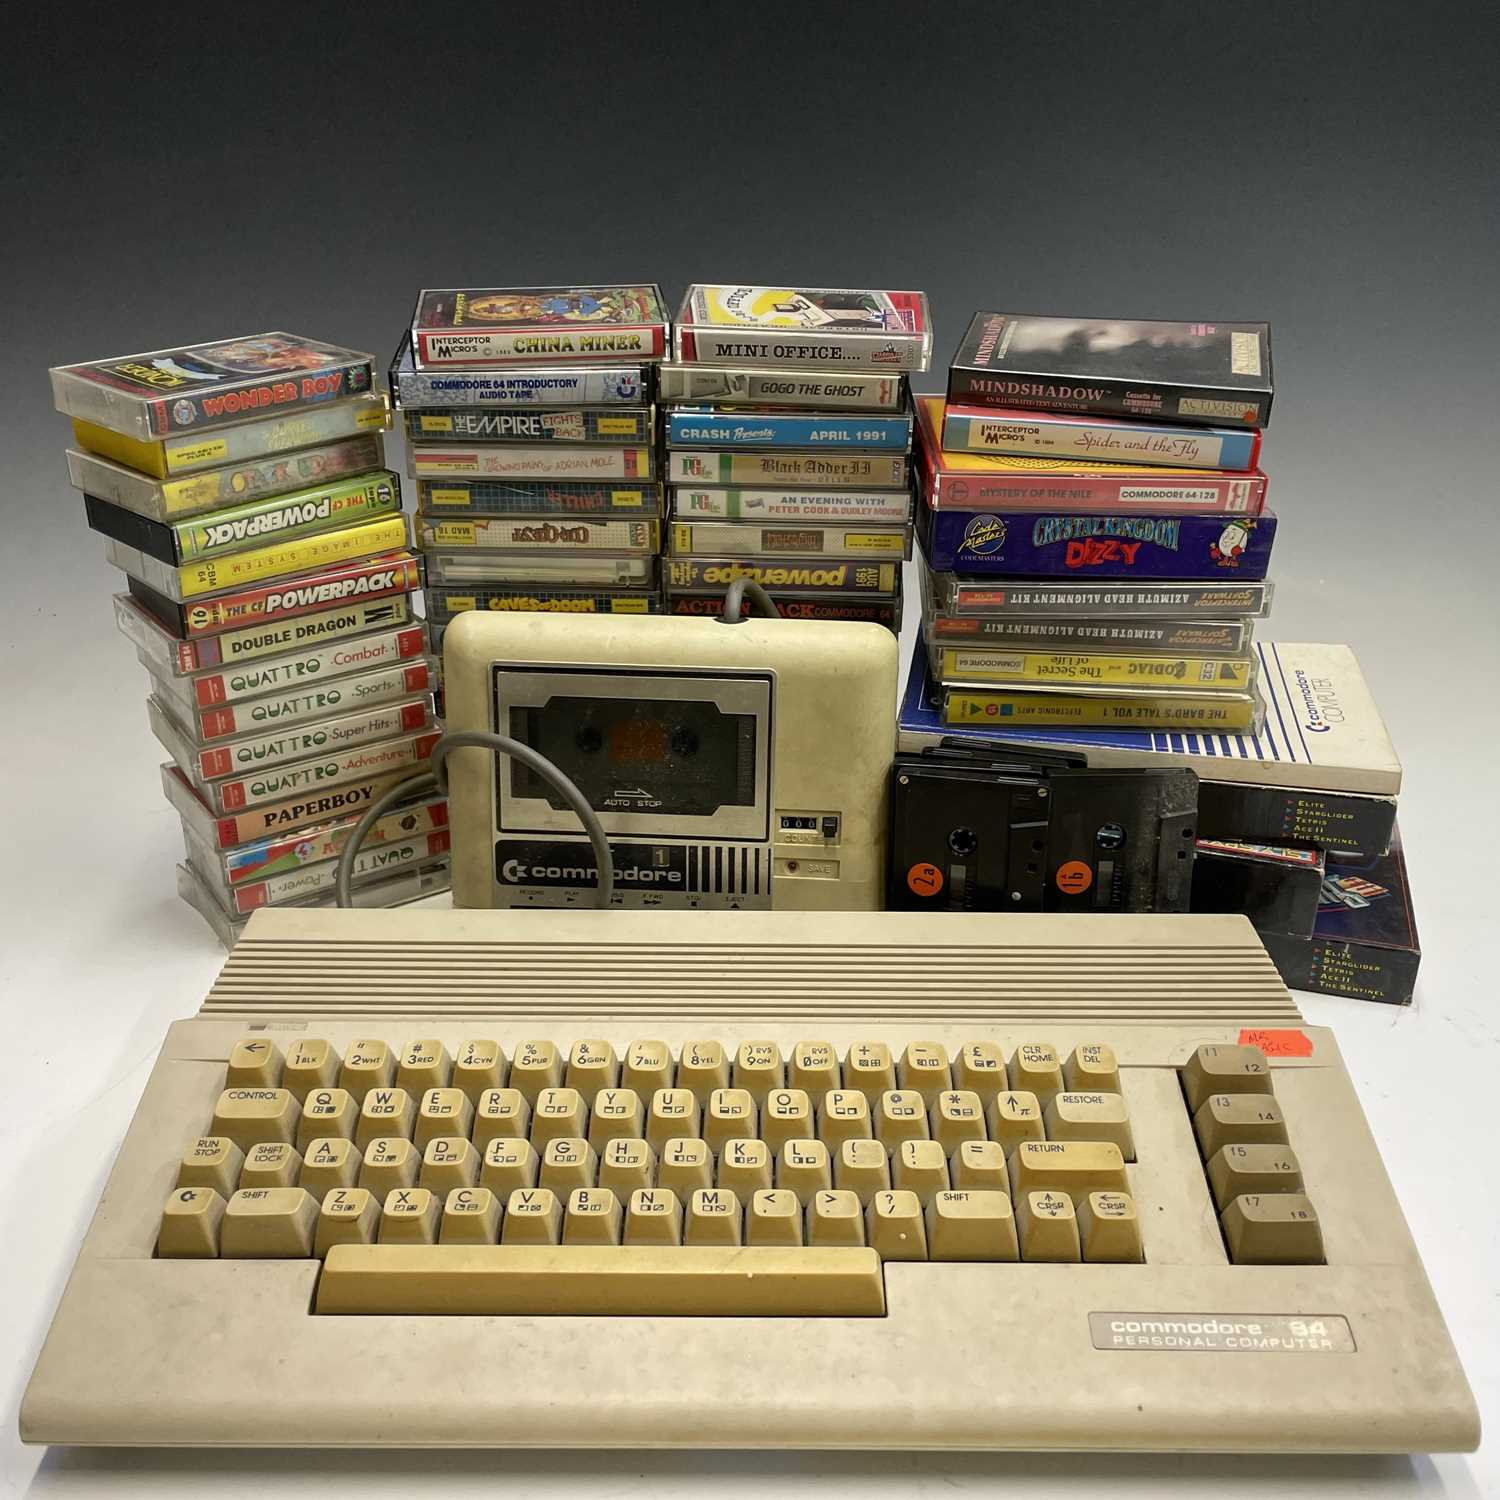 Lot 350 - A Commodore 64 with an original cassette tape...